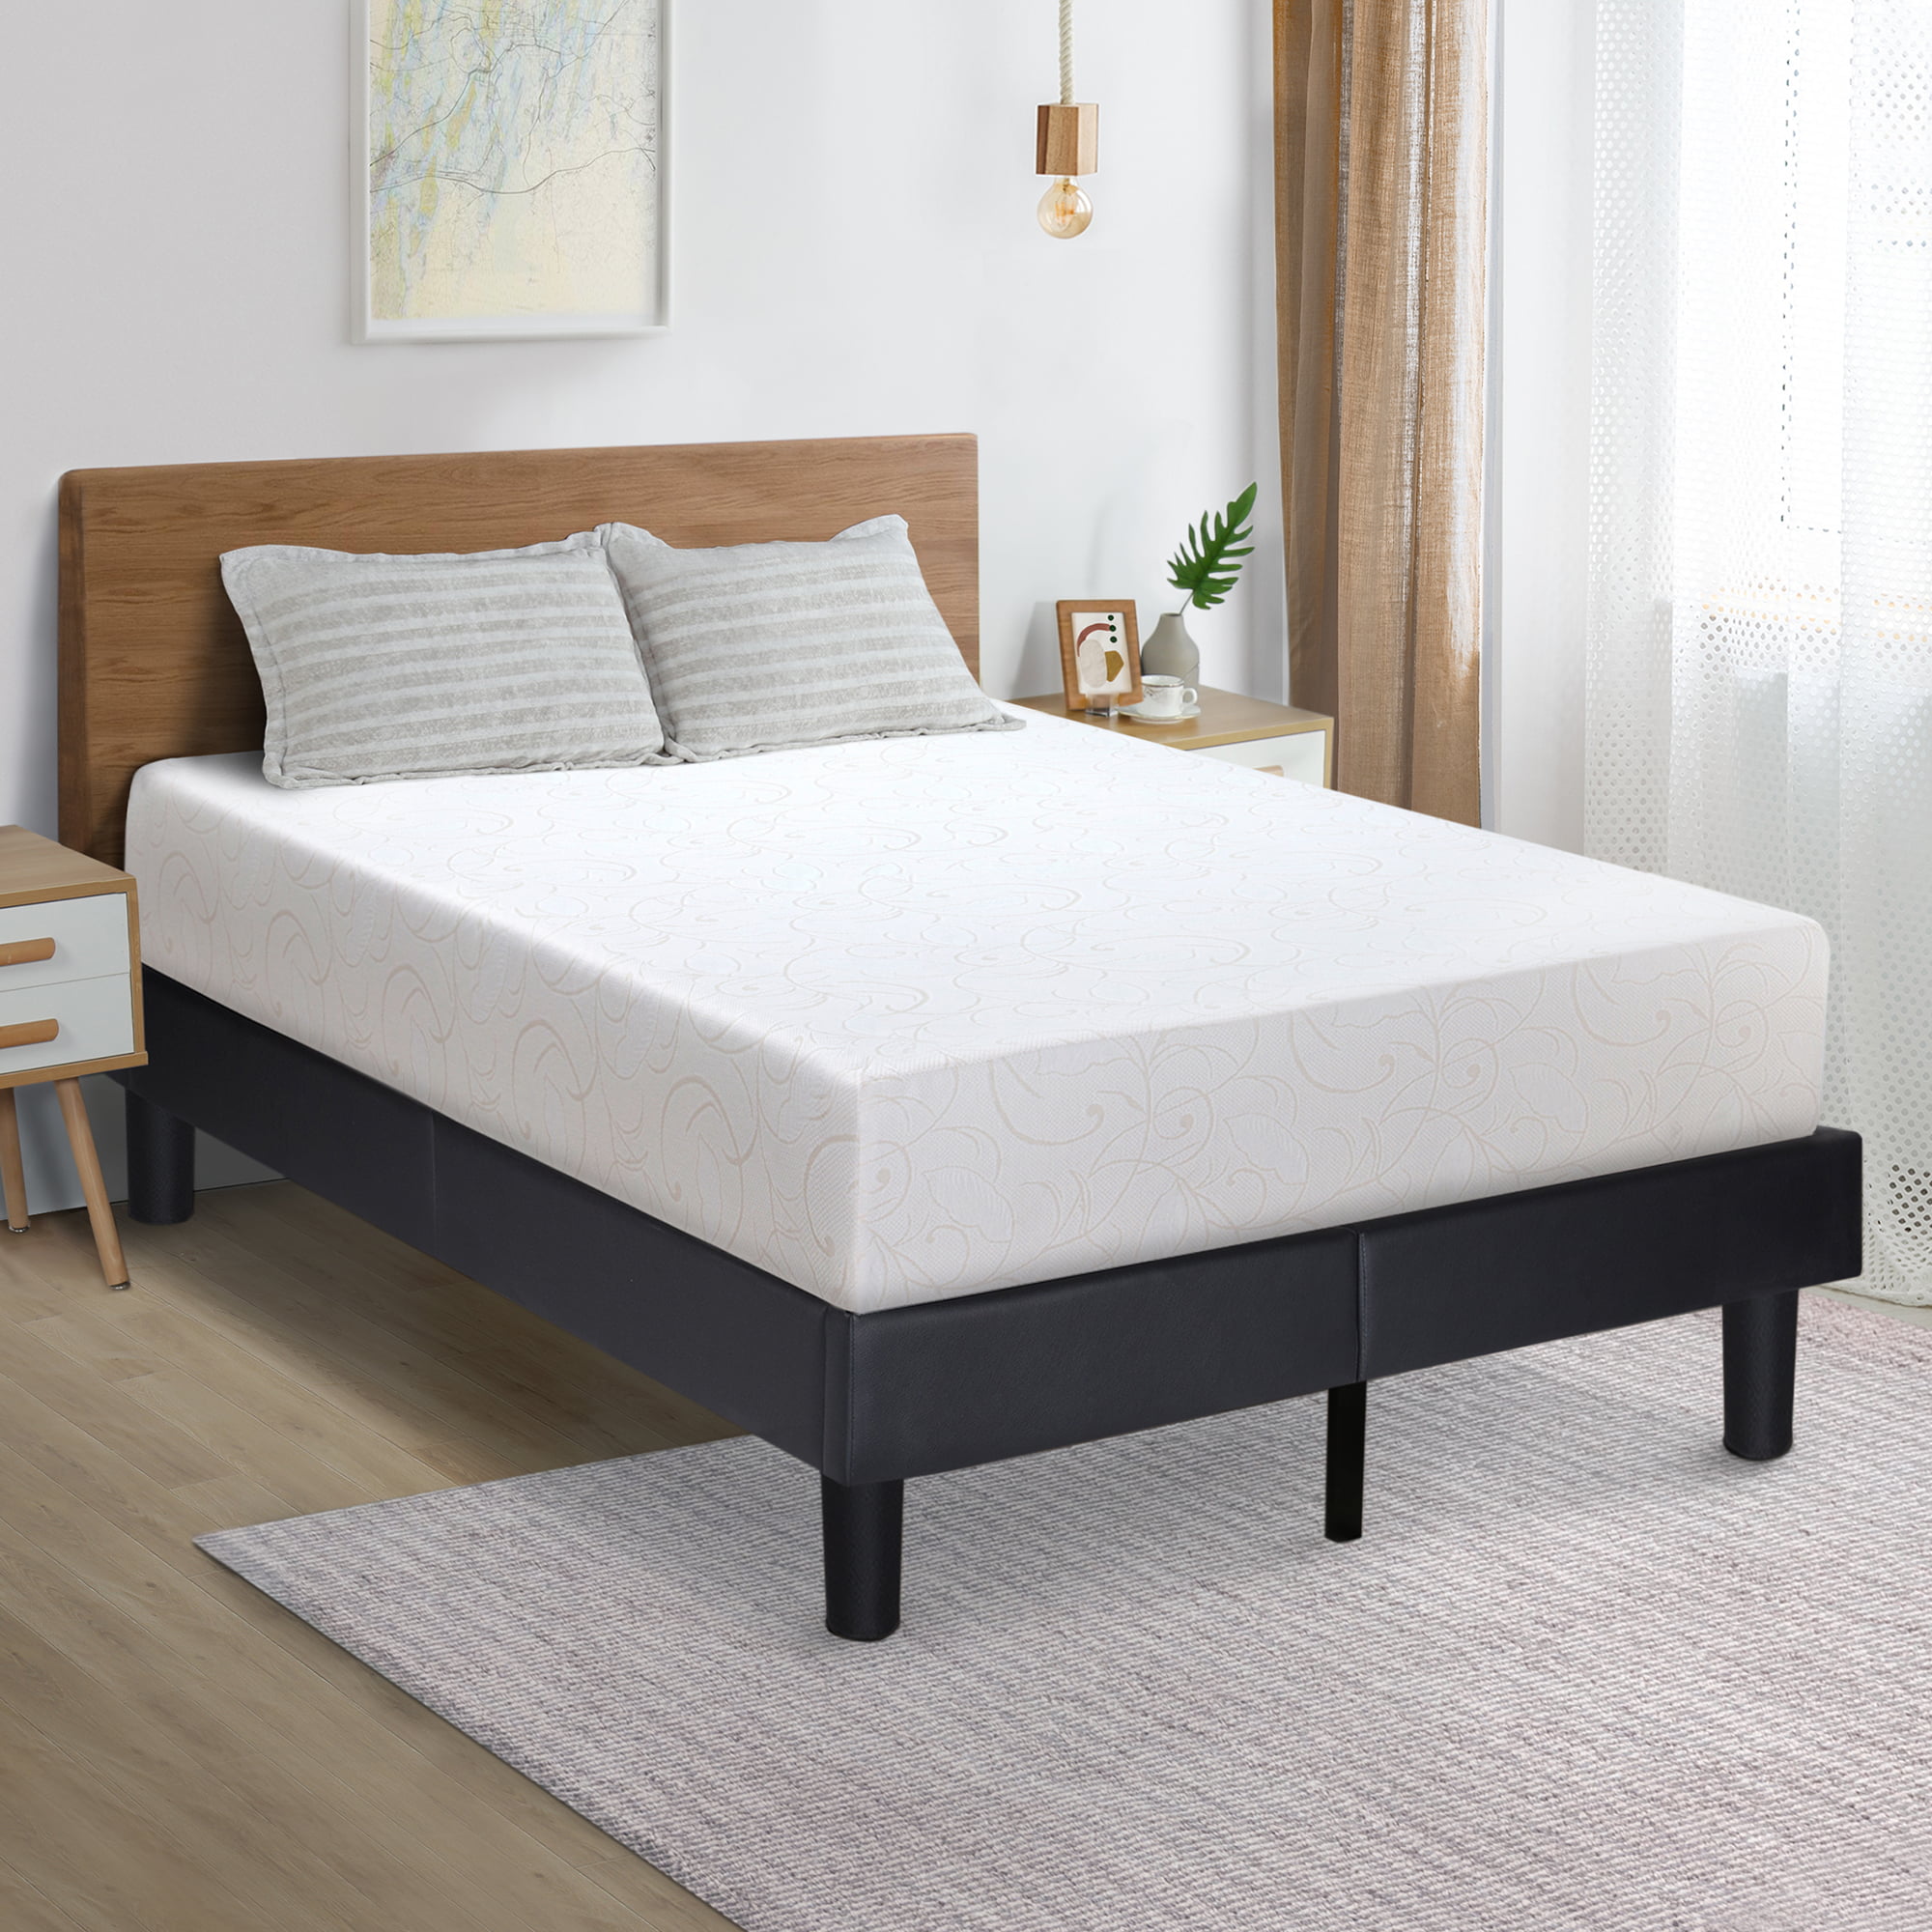 11 inch Deep Memory foam mattress with 1200 pocket springs FREE next day